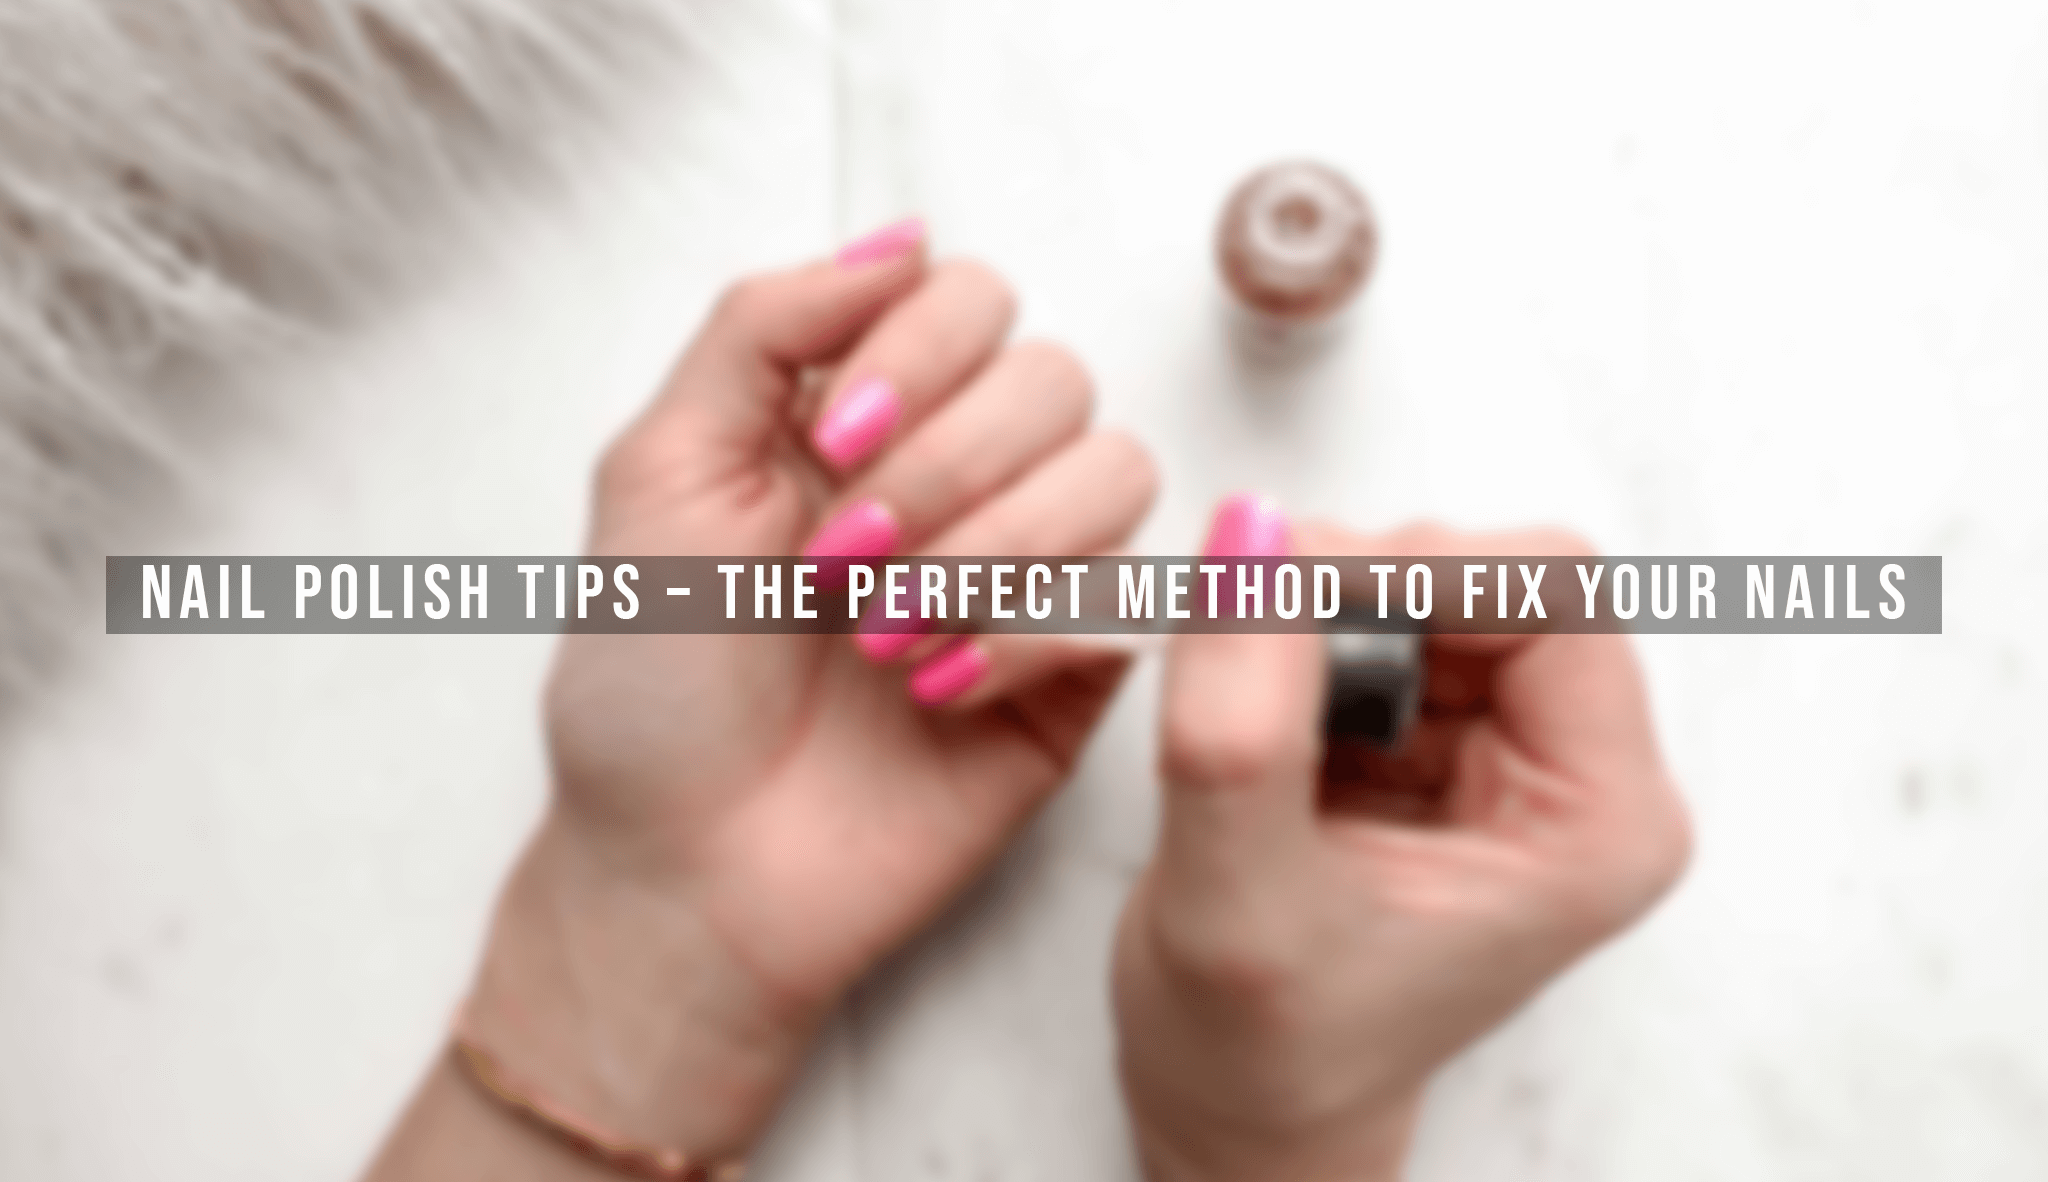 Nail Polish Tips - The Perfect Method to Fix Your Nails - Verrolyne Training